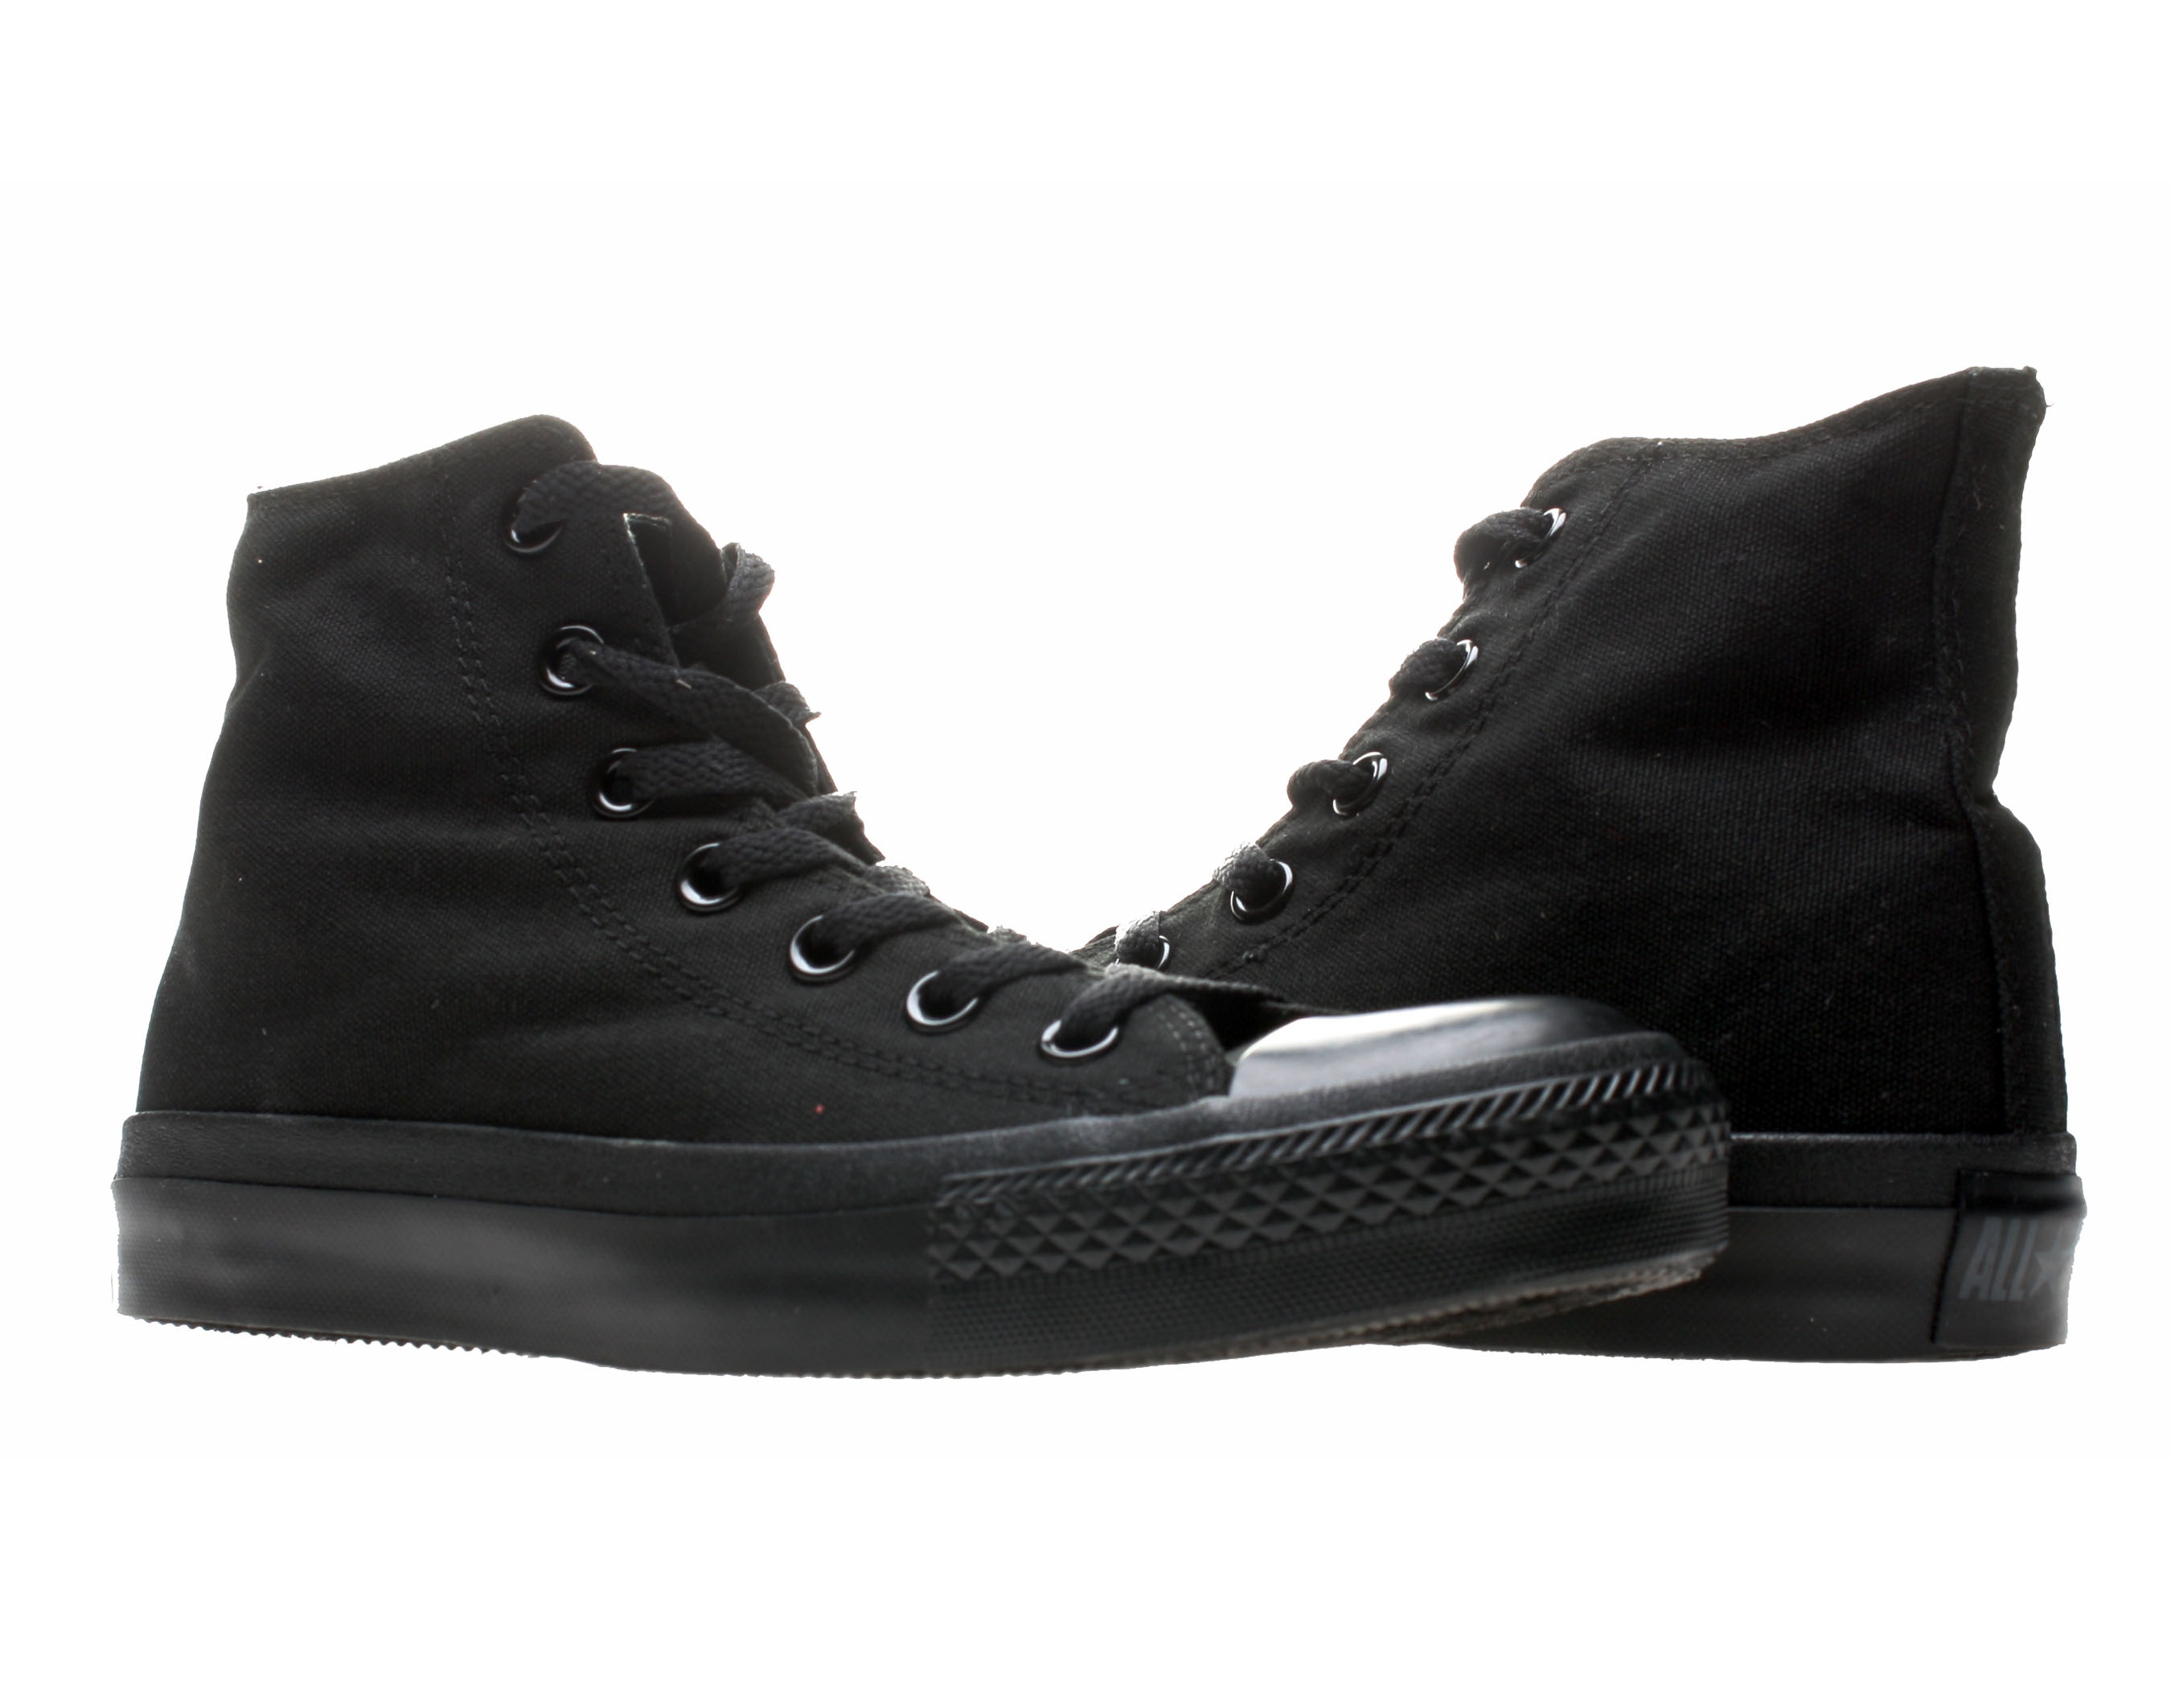 Converse Chuck Taylor All Star Canvas High Top Sneaker - image 1 of 6